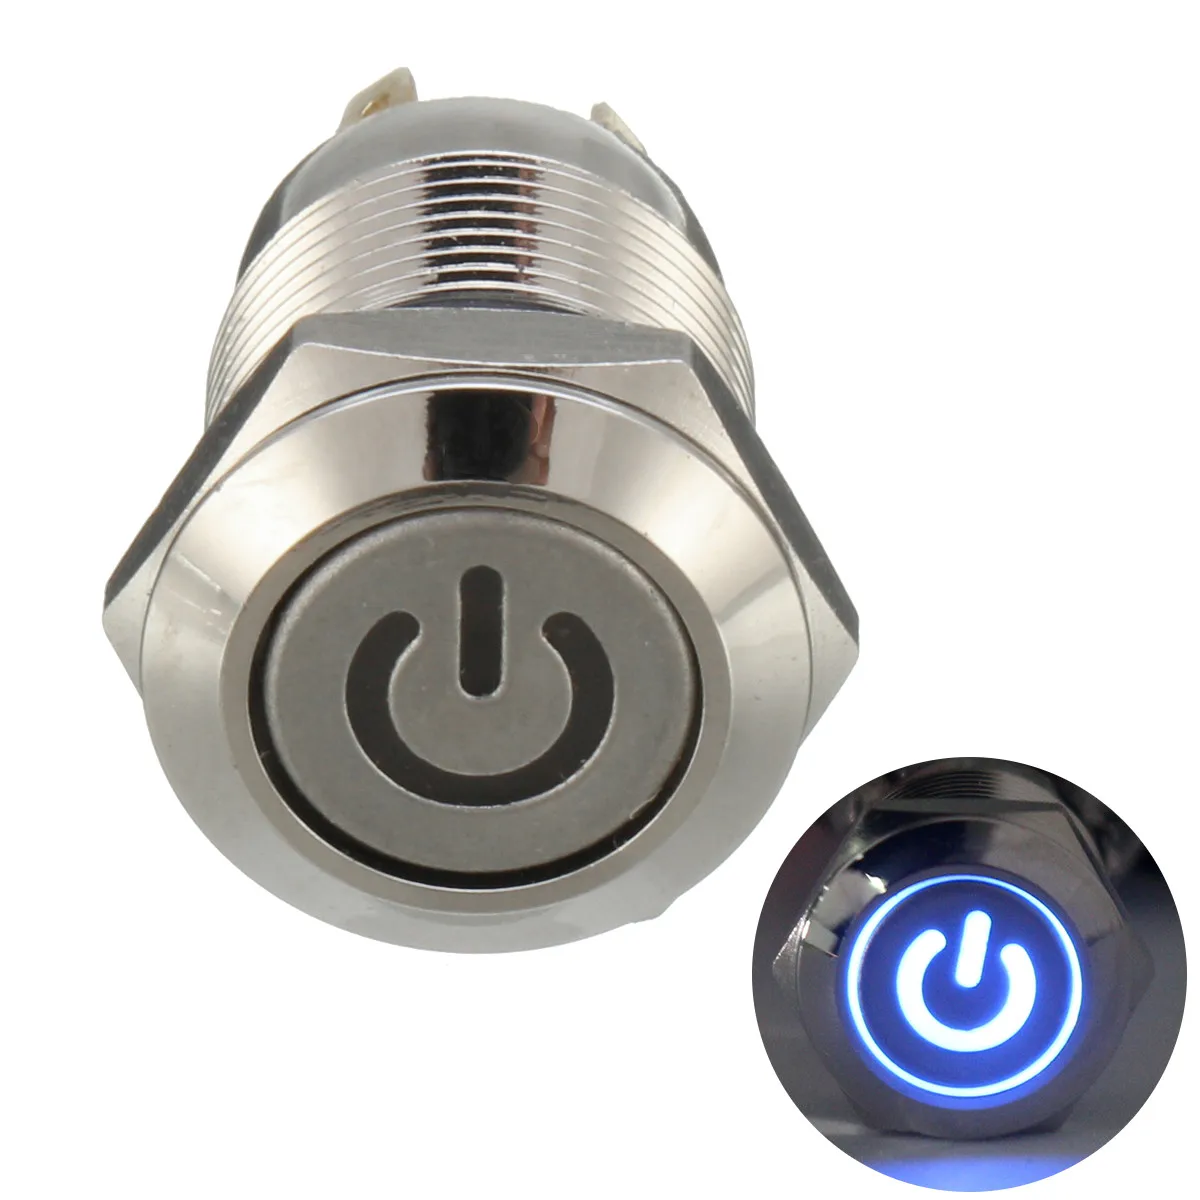 1PC 12MM Self-Recovery LED 12V Metal Button Switch Instantaneous Button Automatic Reset LED Waterproof Button - Цвет: Синий